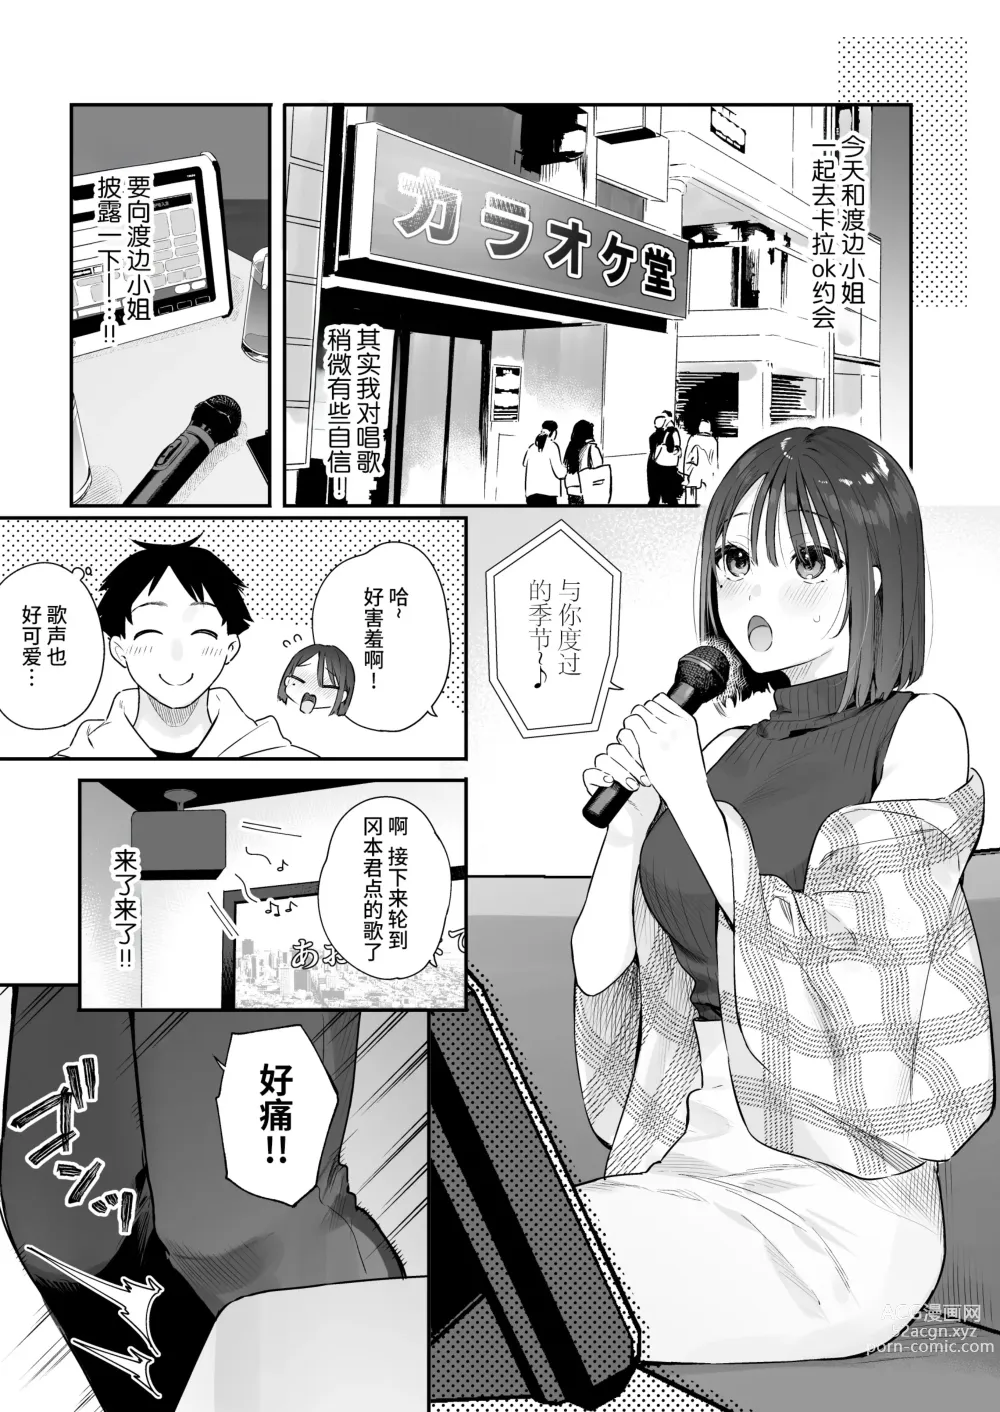 Page 38 of doujinshi 她的发情开关 2